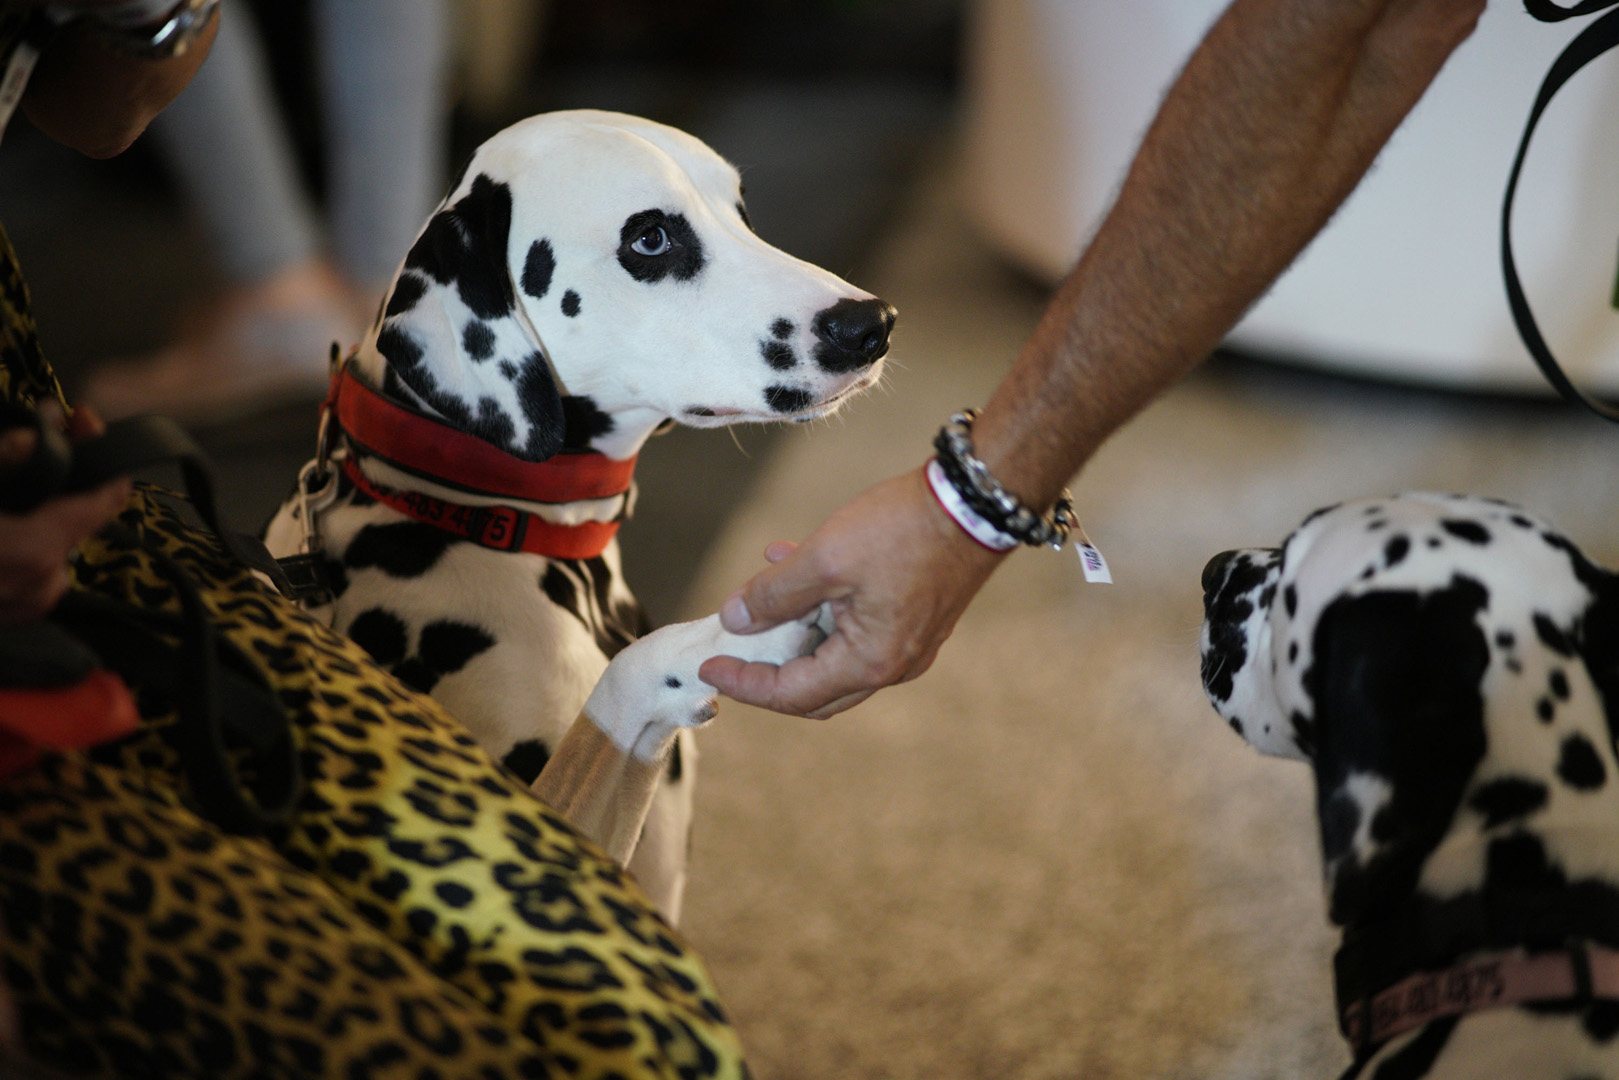 Dalmation enjoying his time at our Puppy Love event